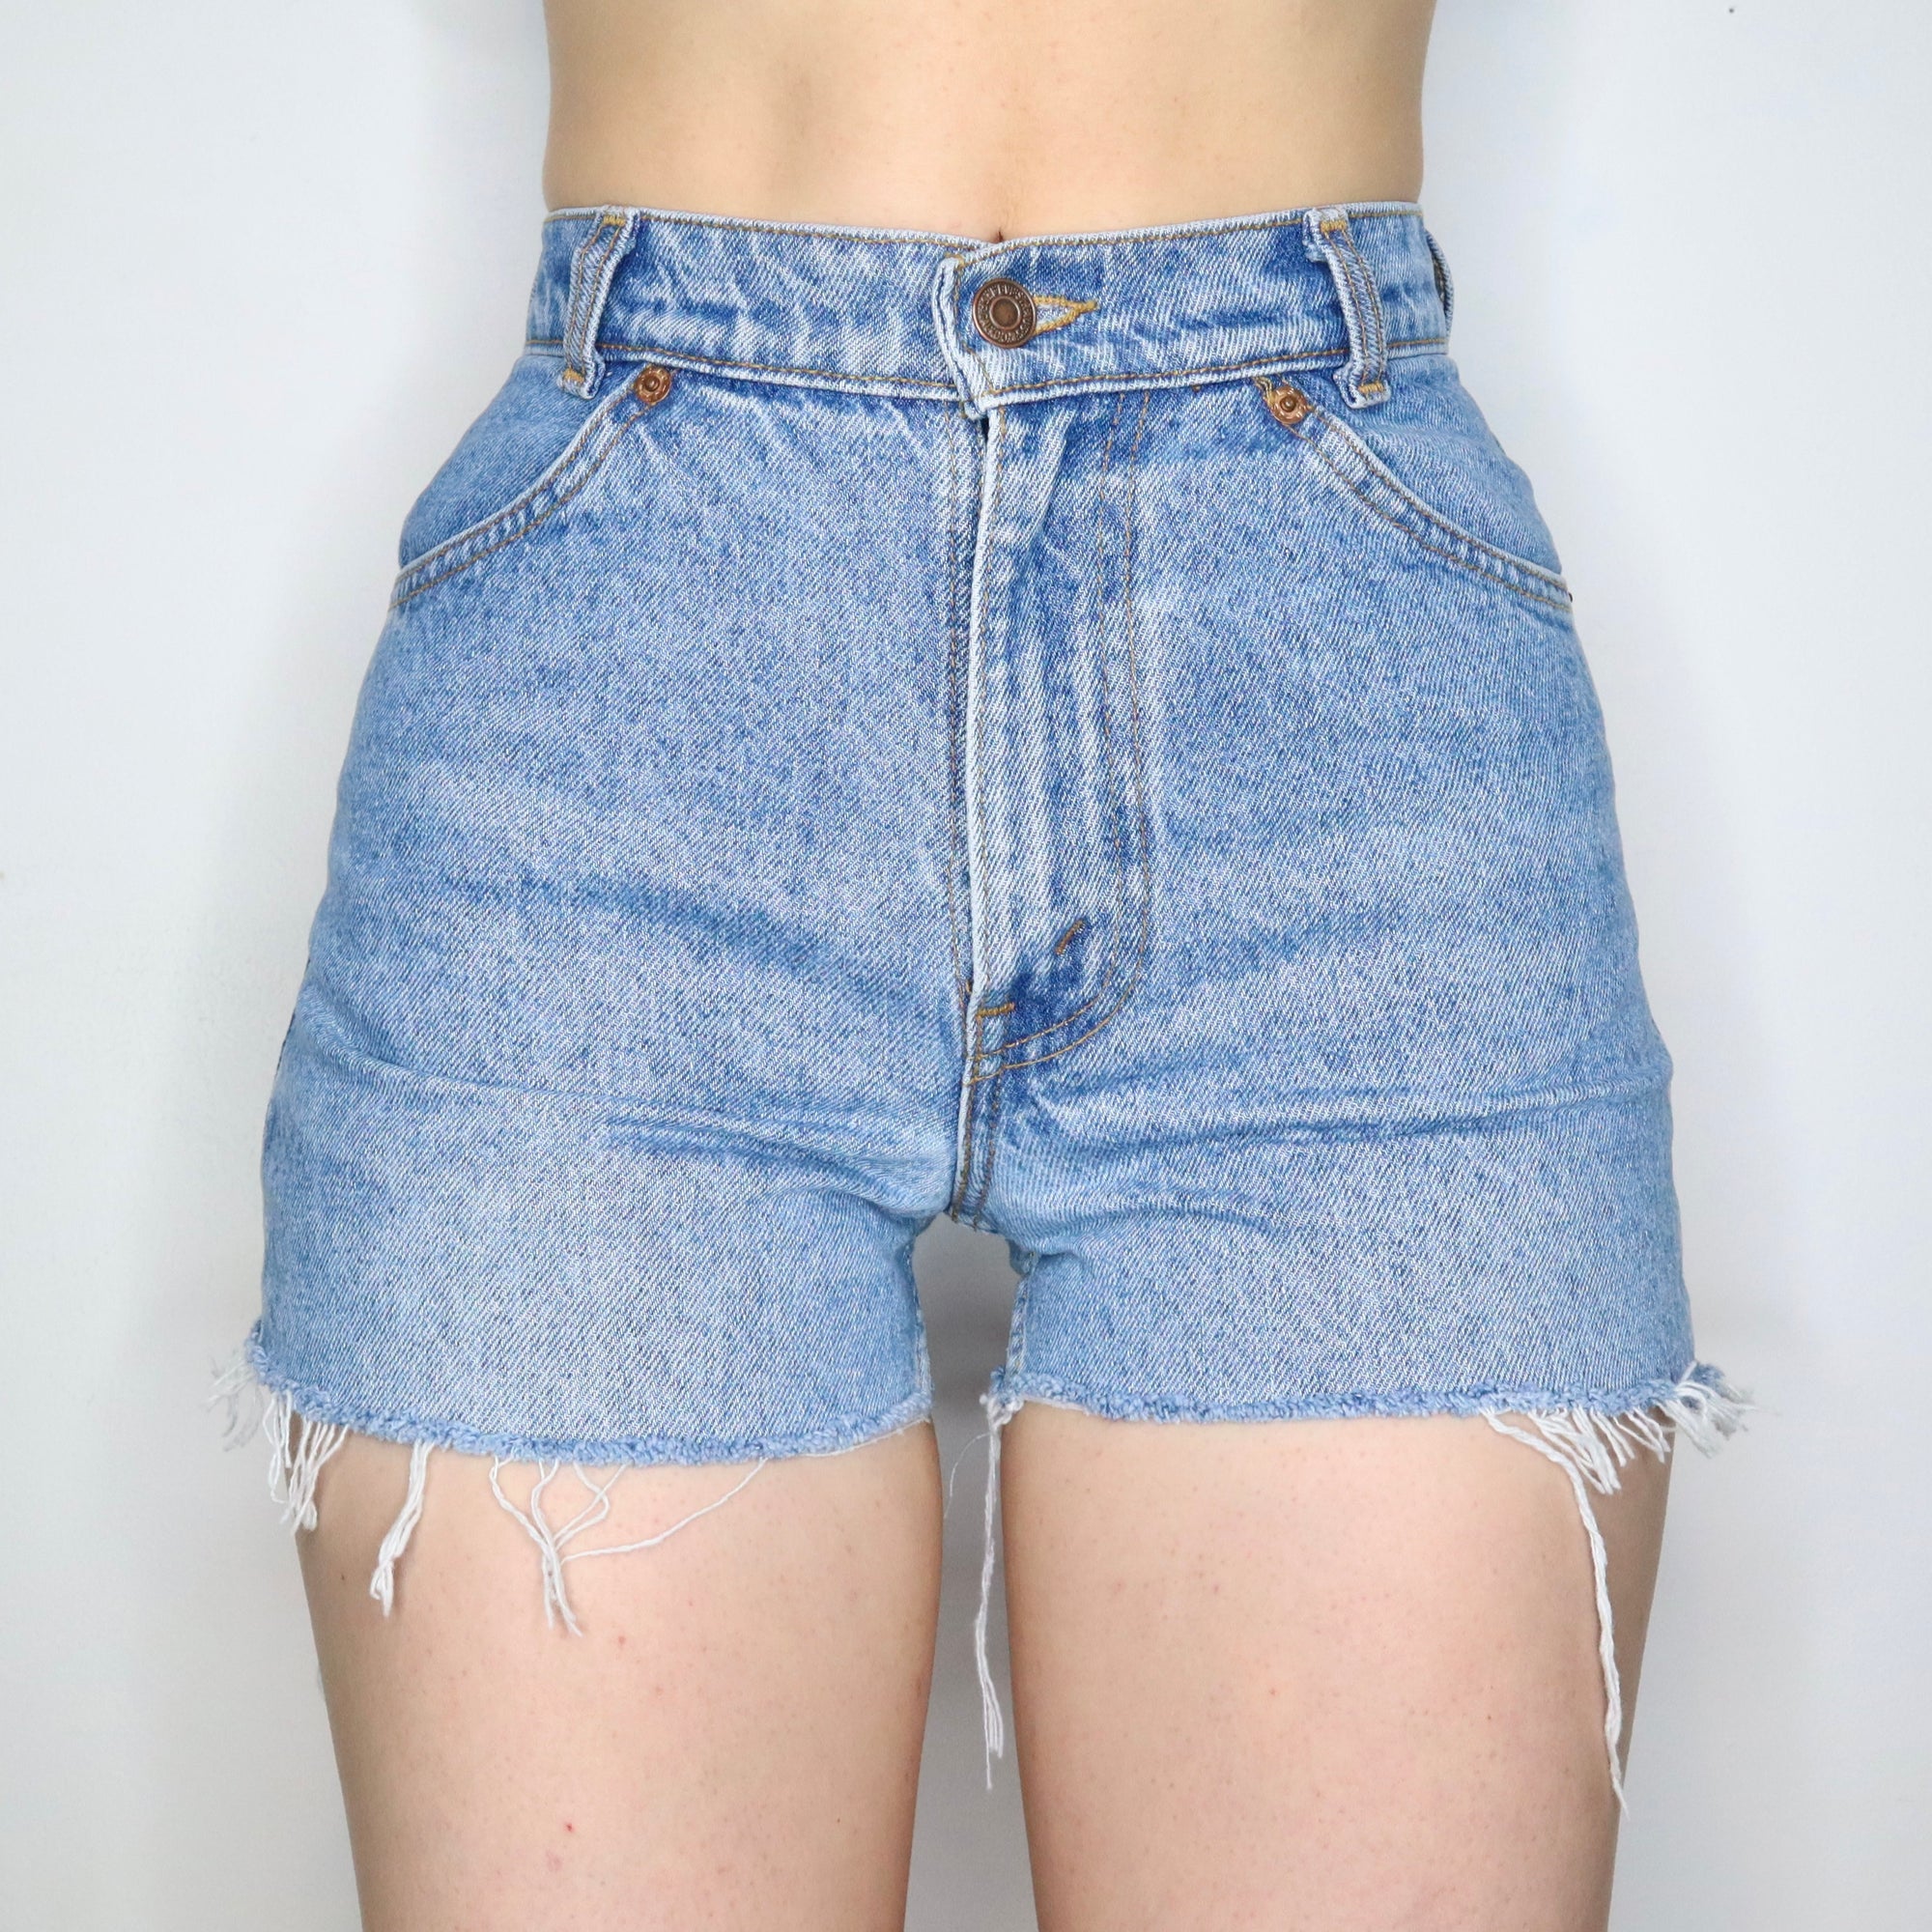 High Waisted Levi's Shorts (XS-S)